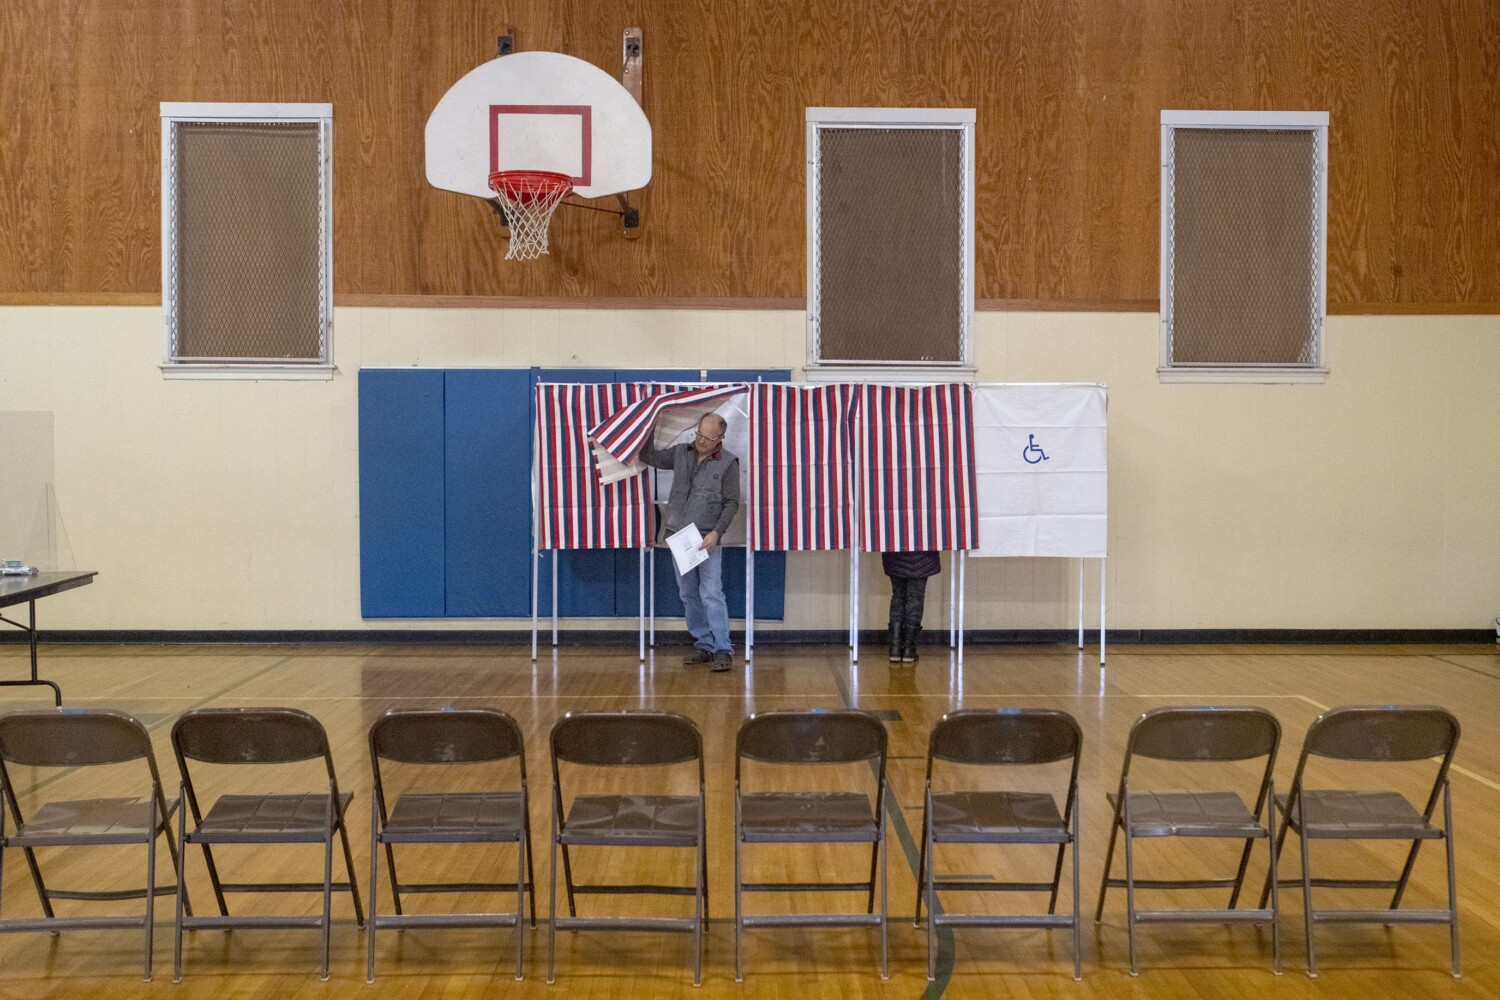 Man emerging from voting booth in otherwise empty gym